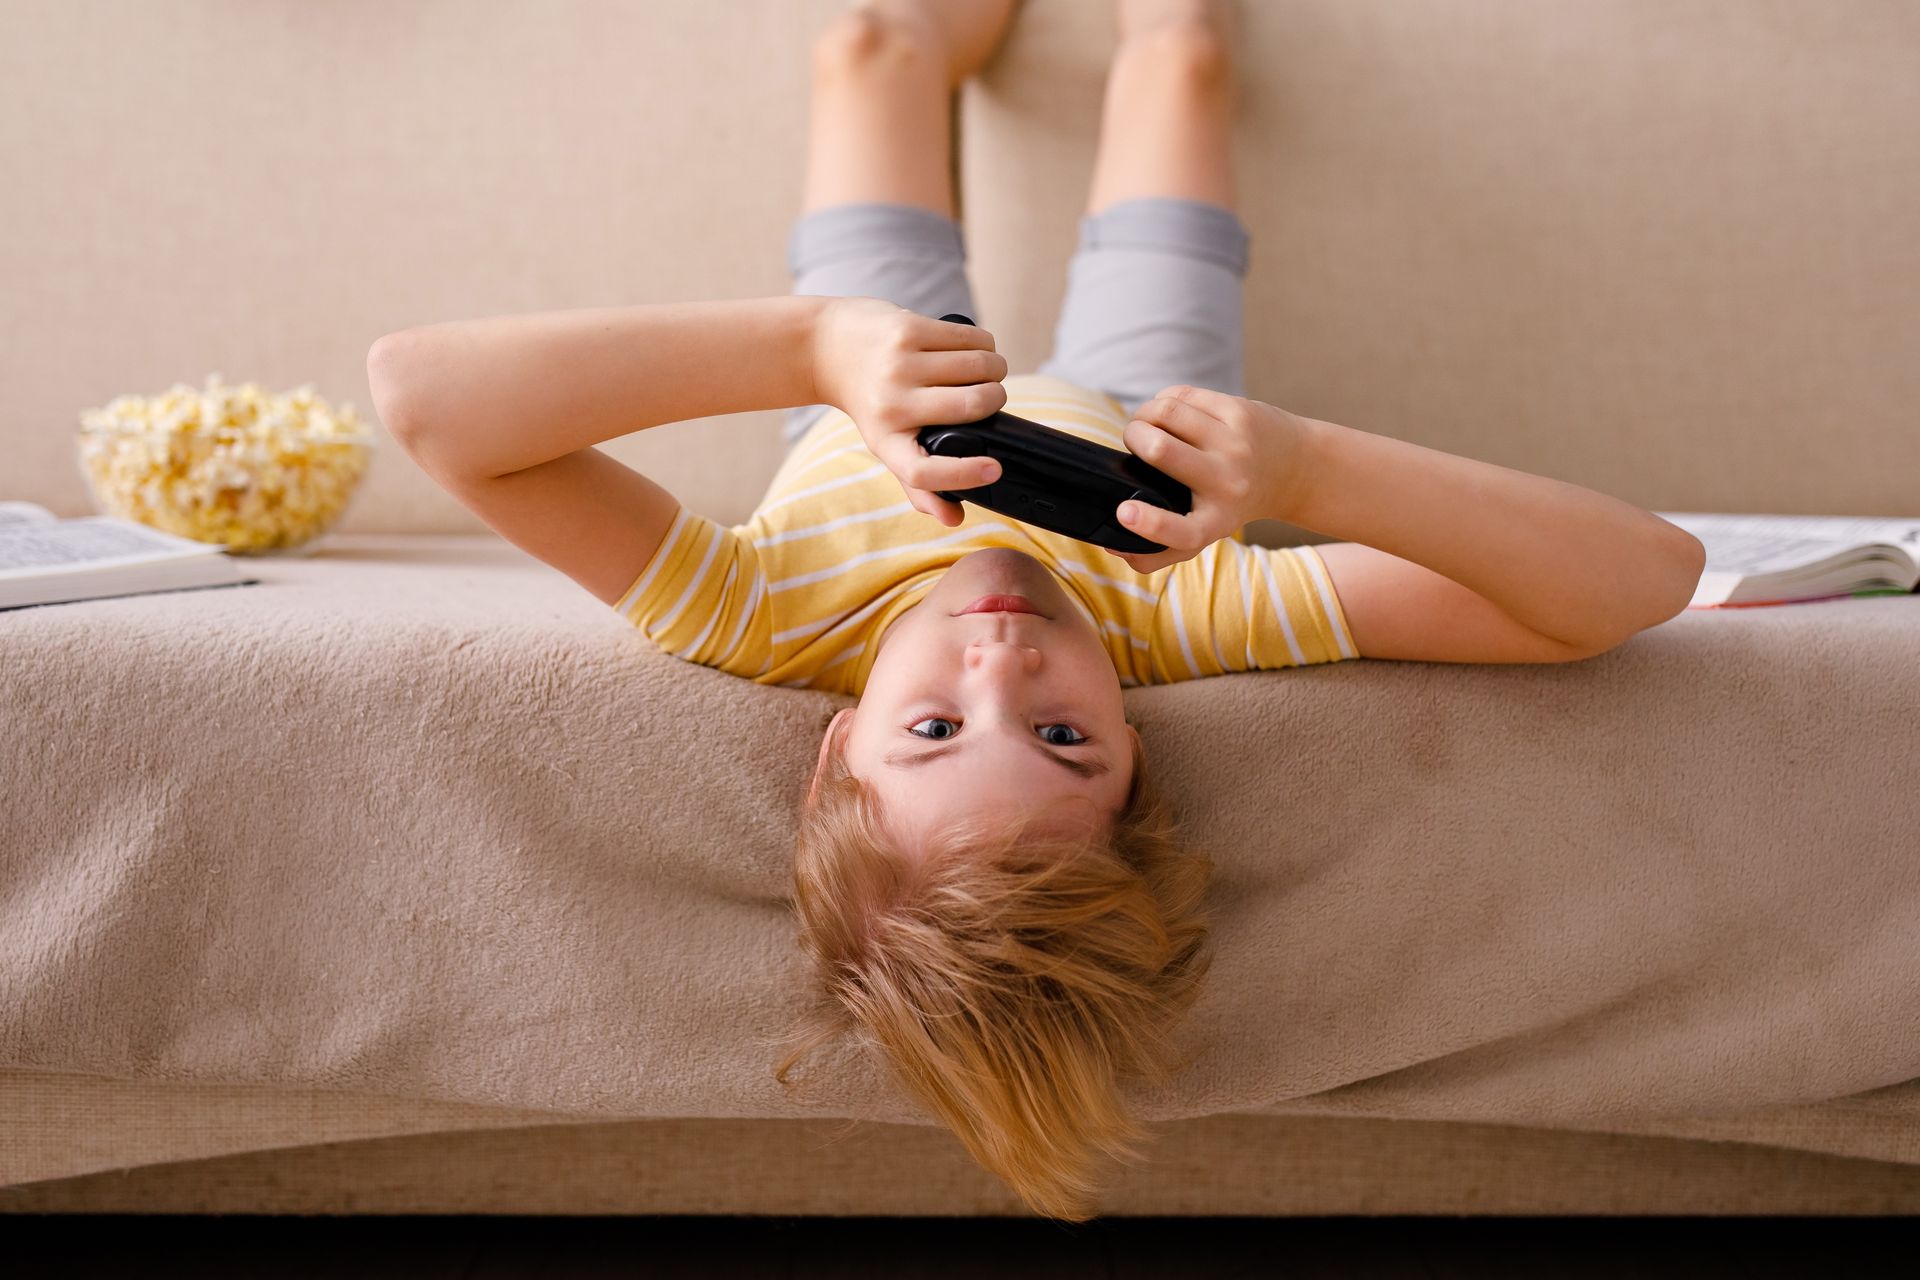 Boy on lounge upside down, holding gaming controller with popcorn next to him.